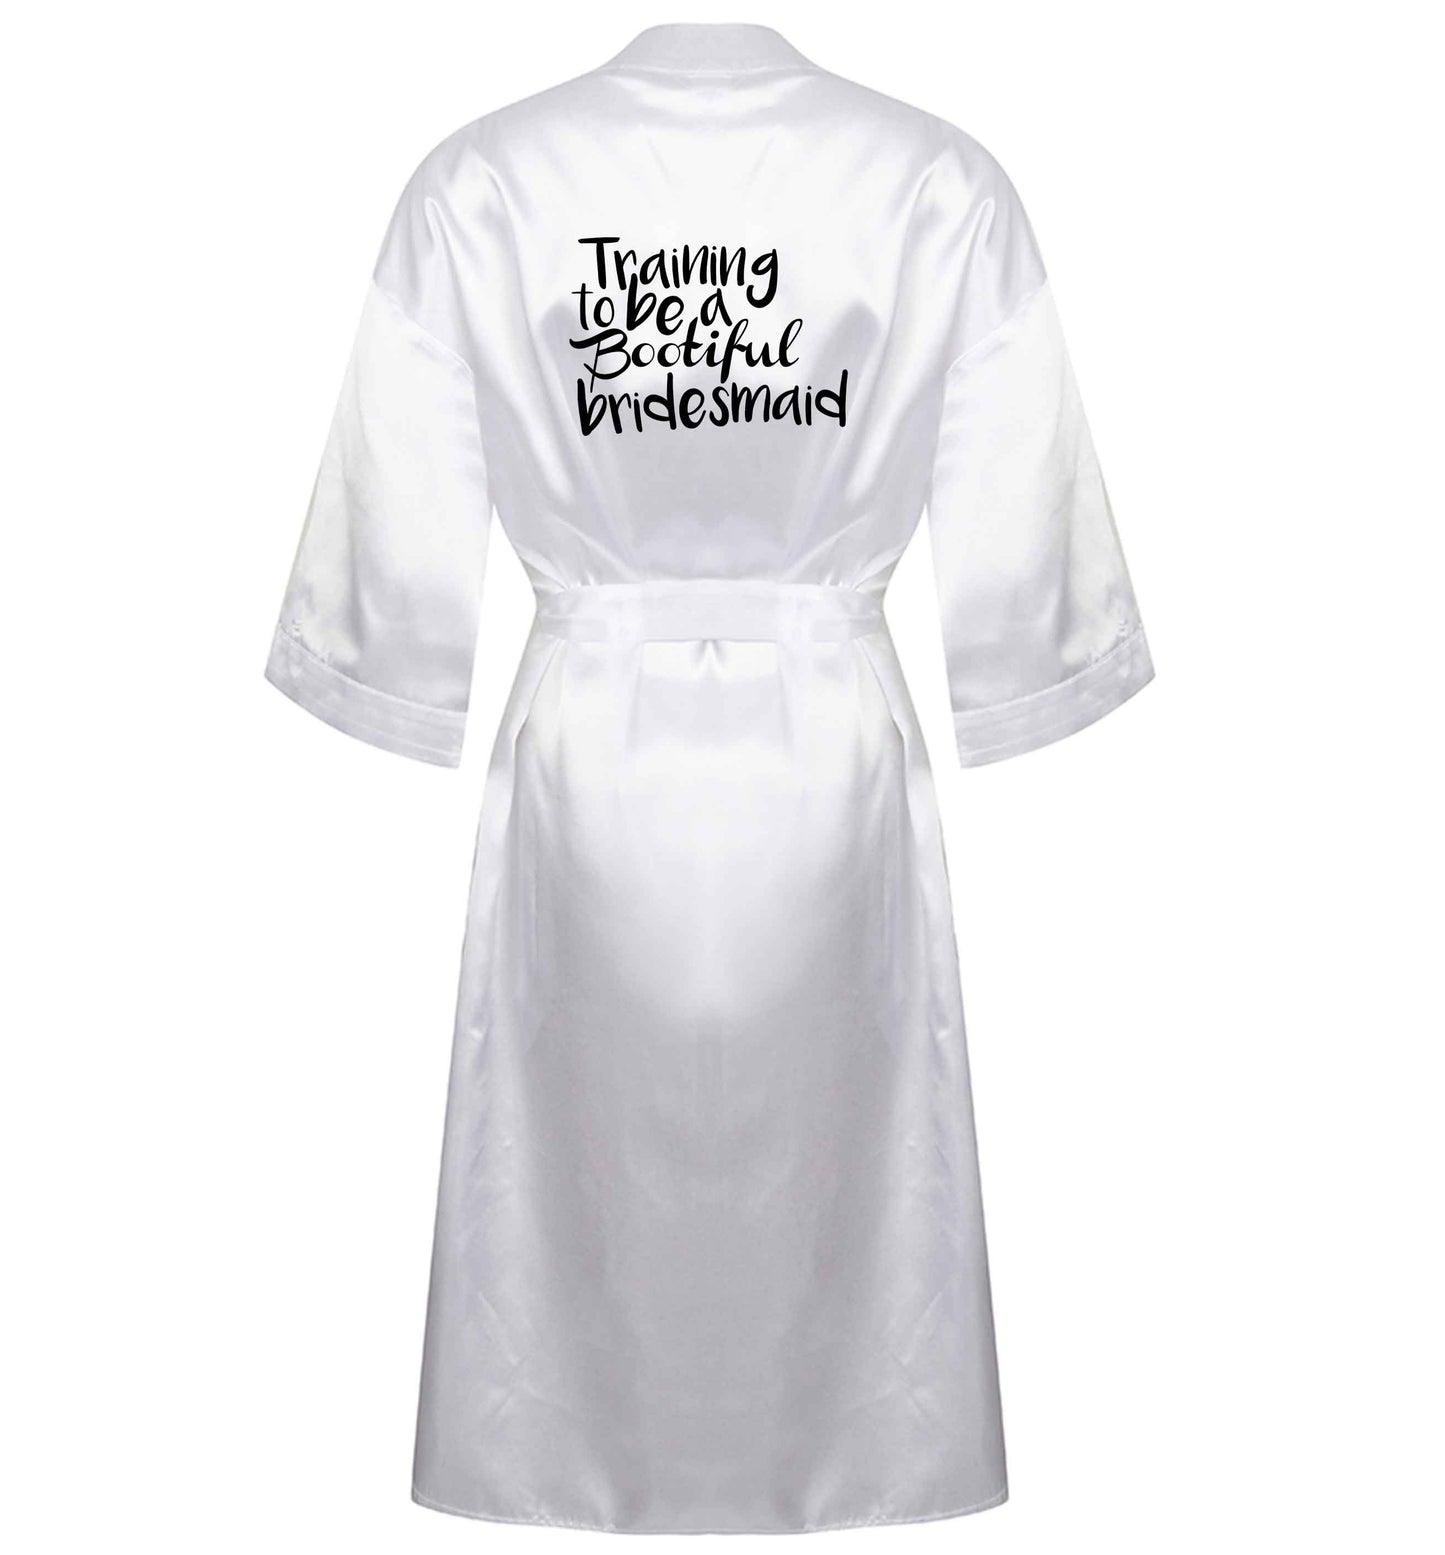 Get motivated and get fit for your big day! Our workout quotes and designs will get you ready to sweat! Perfect for any bride, groom or bridesmaid to be!  XL/XXL white ladies dressing gown size 16/18